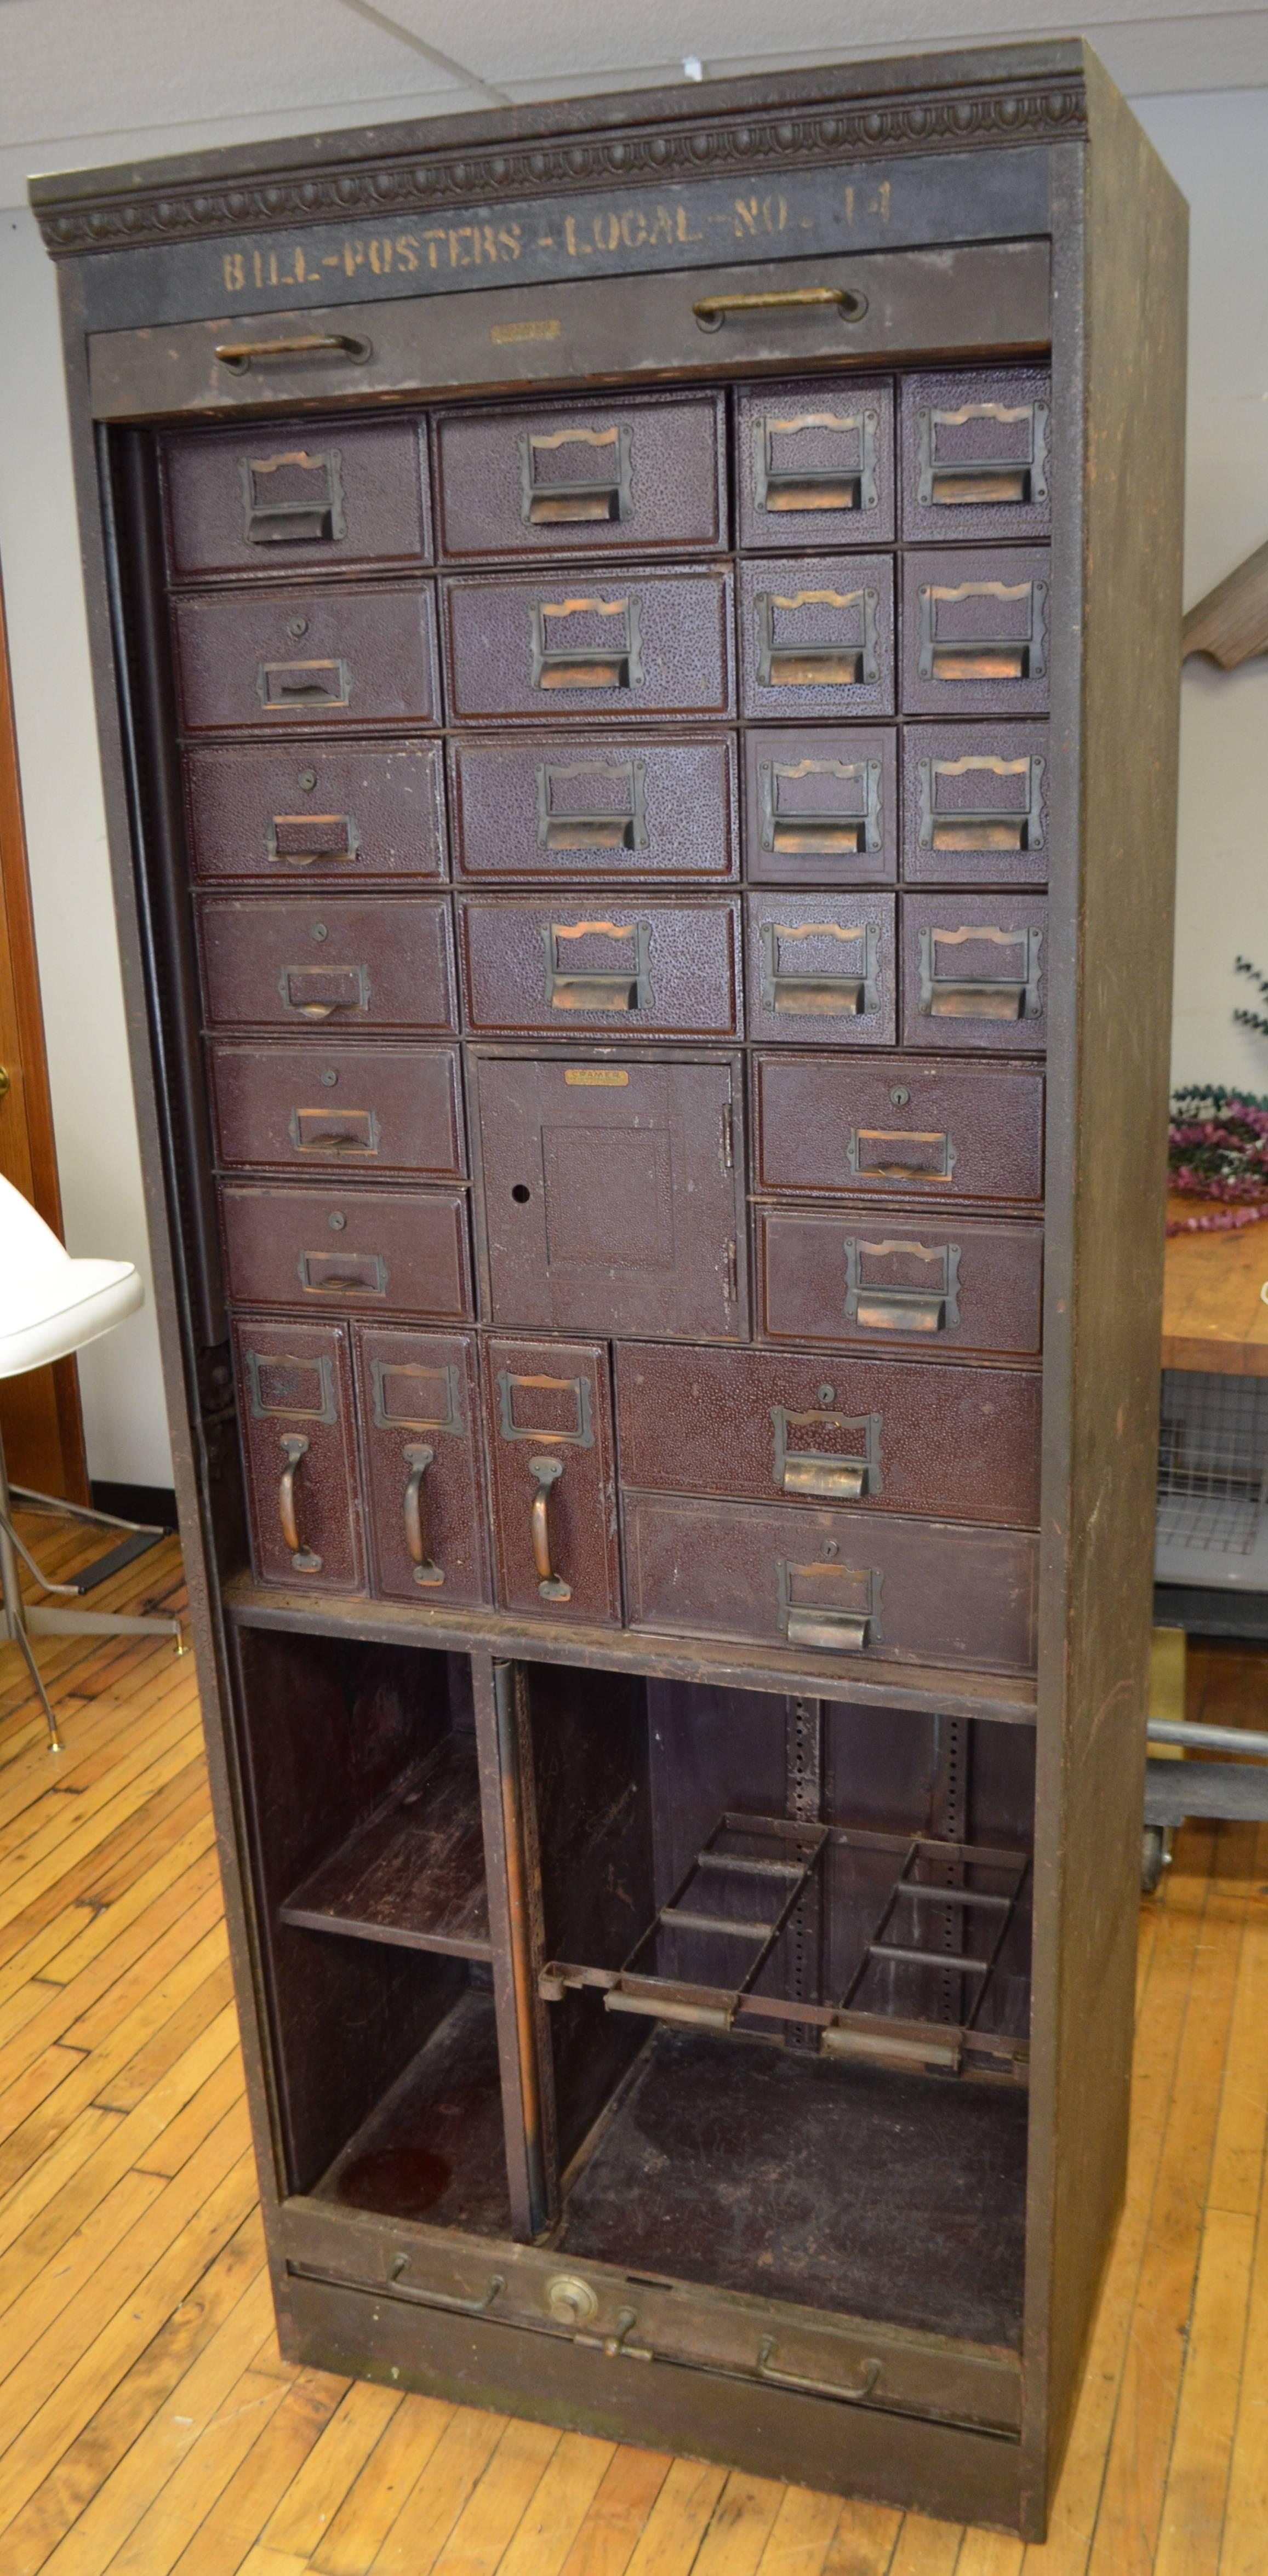 Storage unit hails from a midwestern post office, circa 1930s. An amazing piece containing numerous drawers of varying sizes including those for holding file folders. An inner safe contains three smaller drawers. The security door rolls from top and